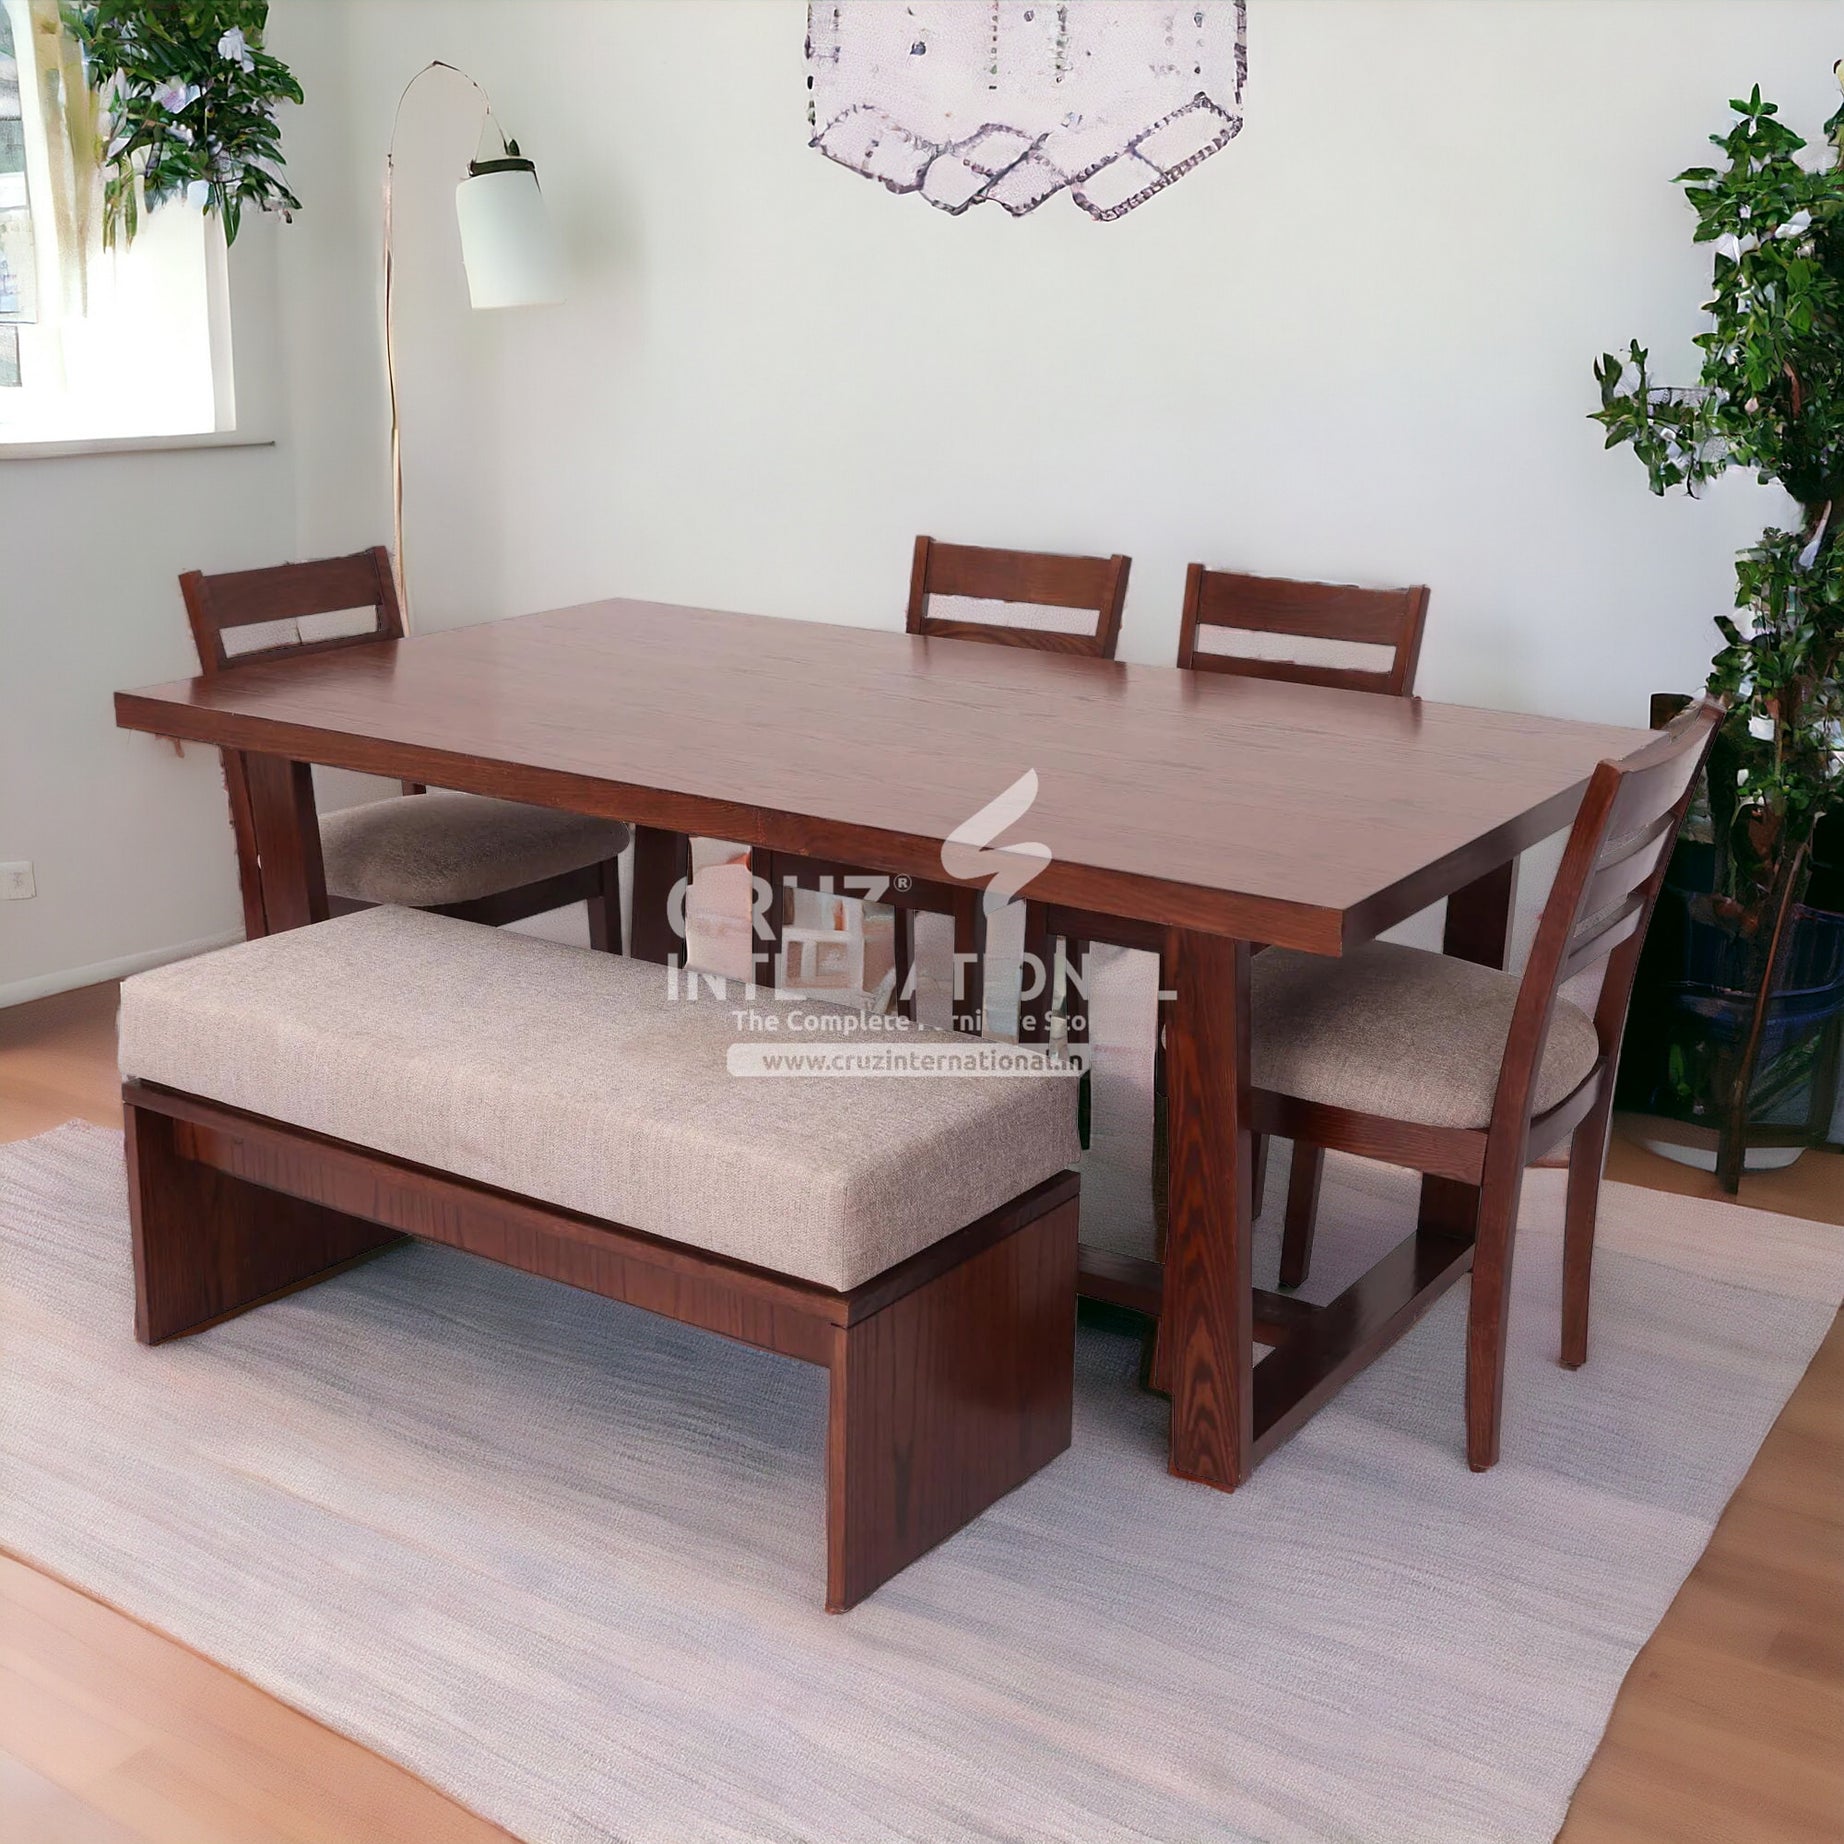 Classic George Benito Wooden Dinning Table